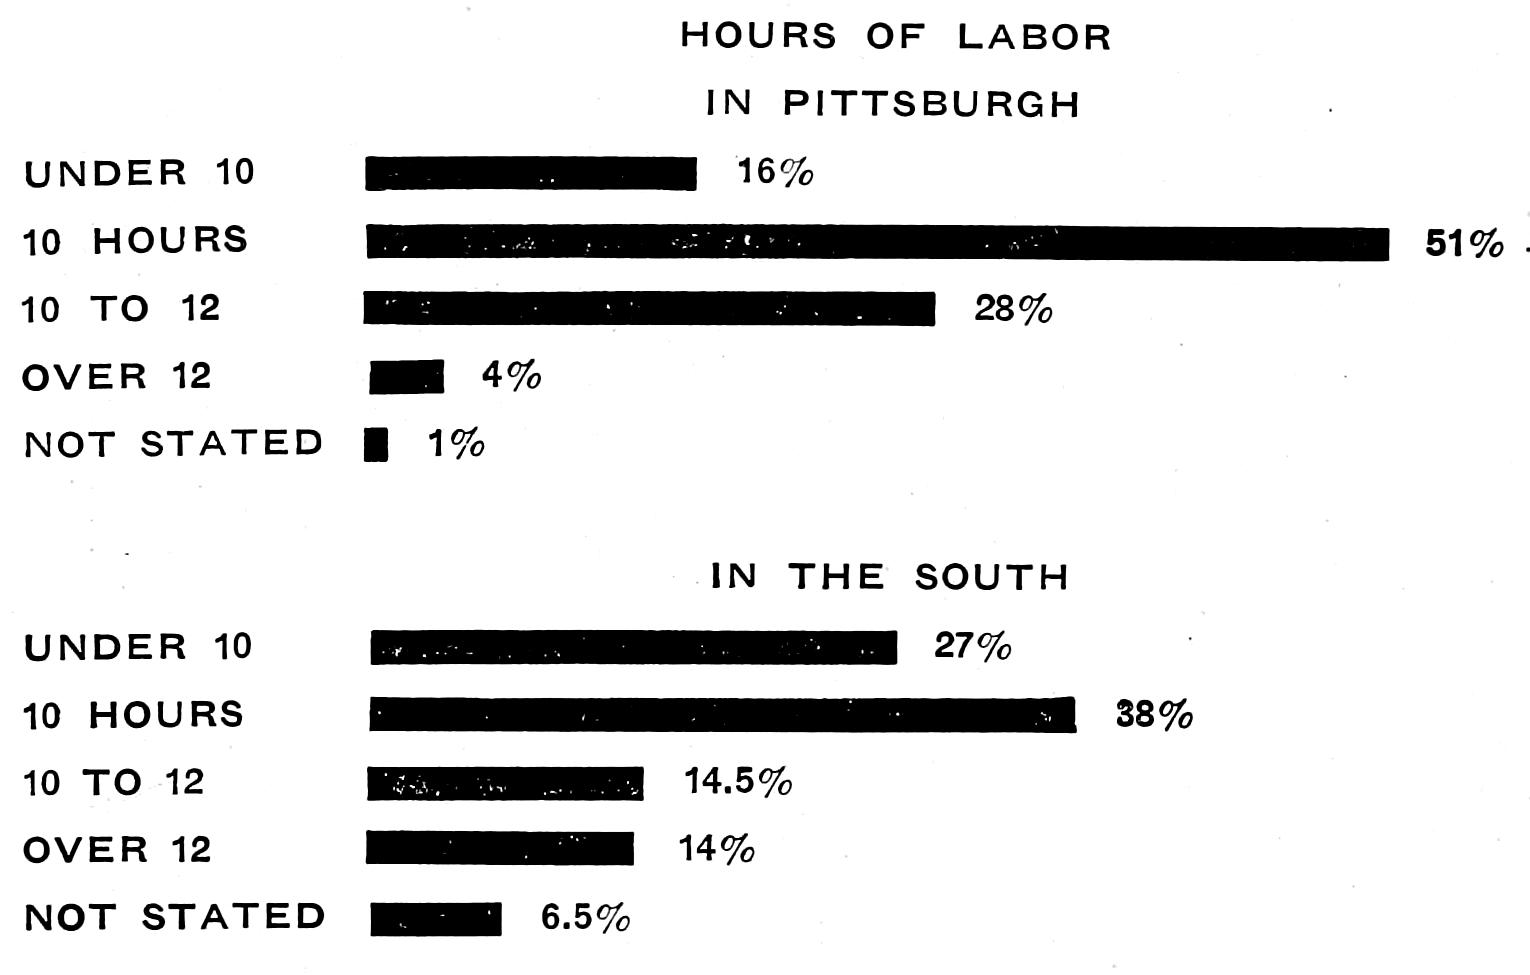 Table displaying how many hours people worked in Pittsburgh versus the South